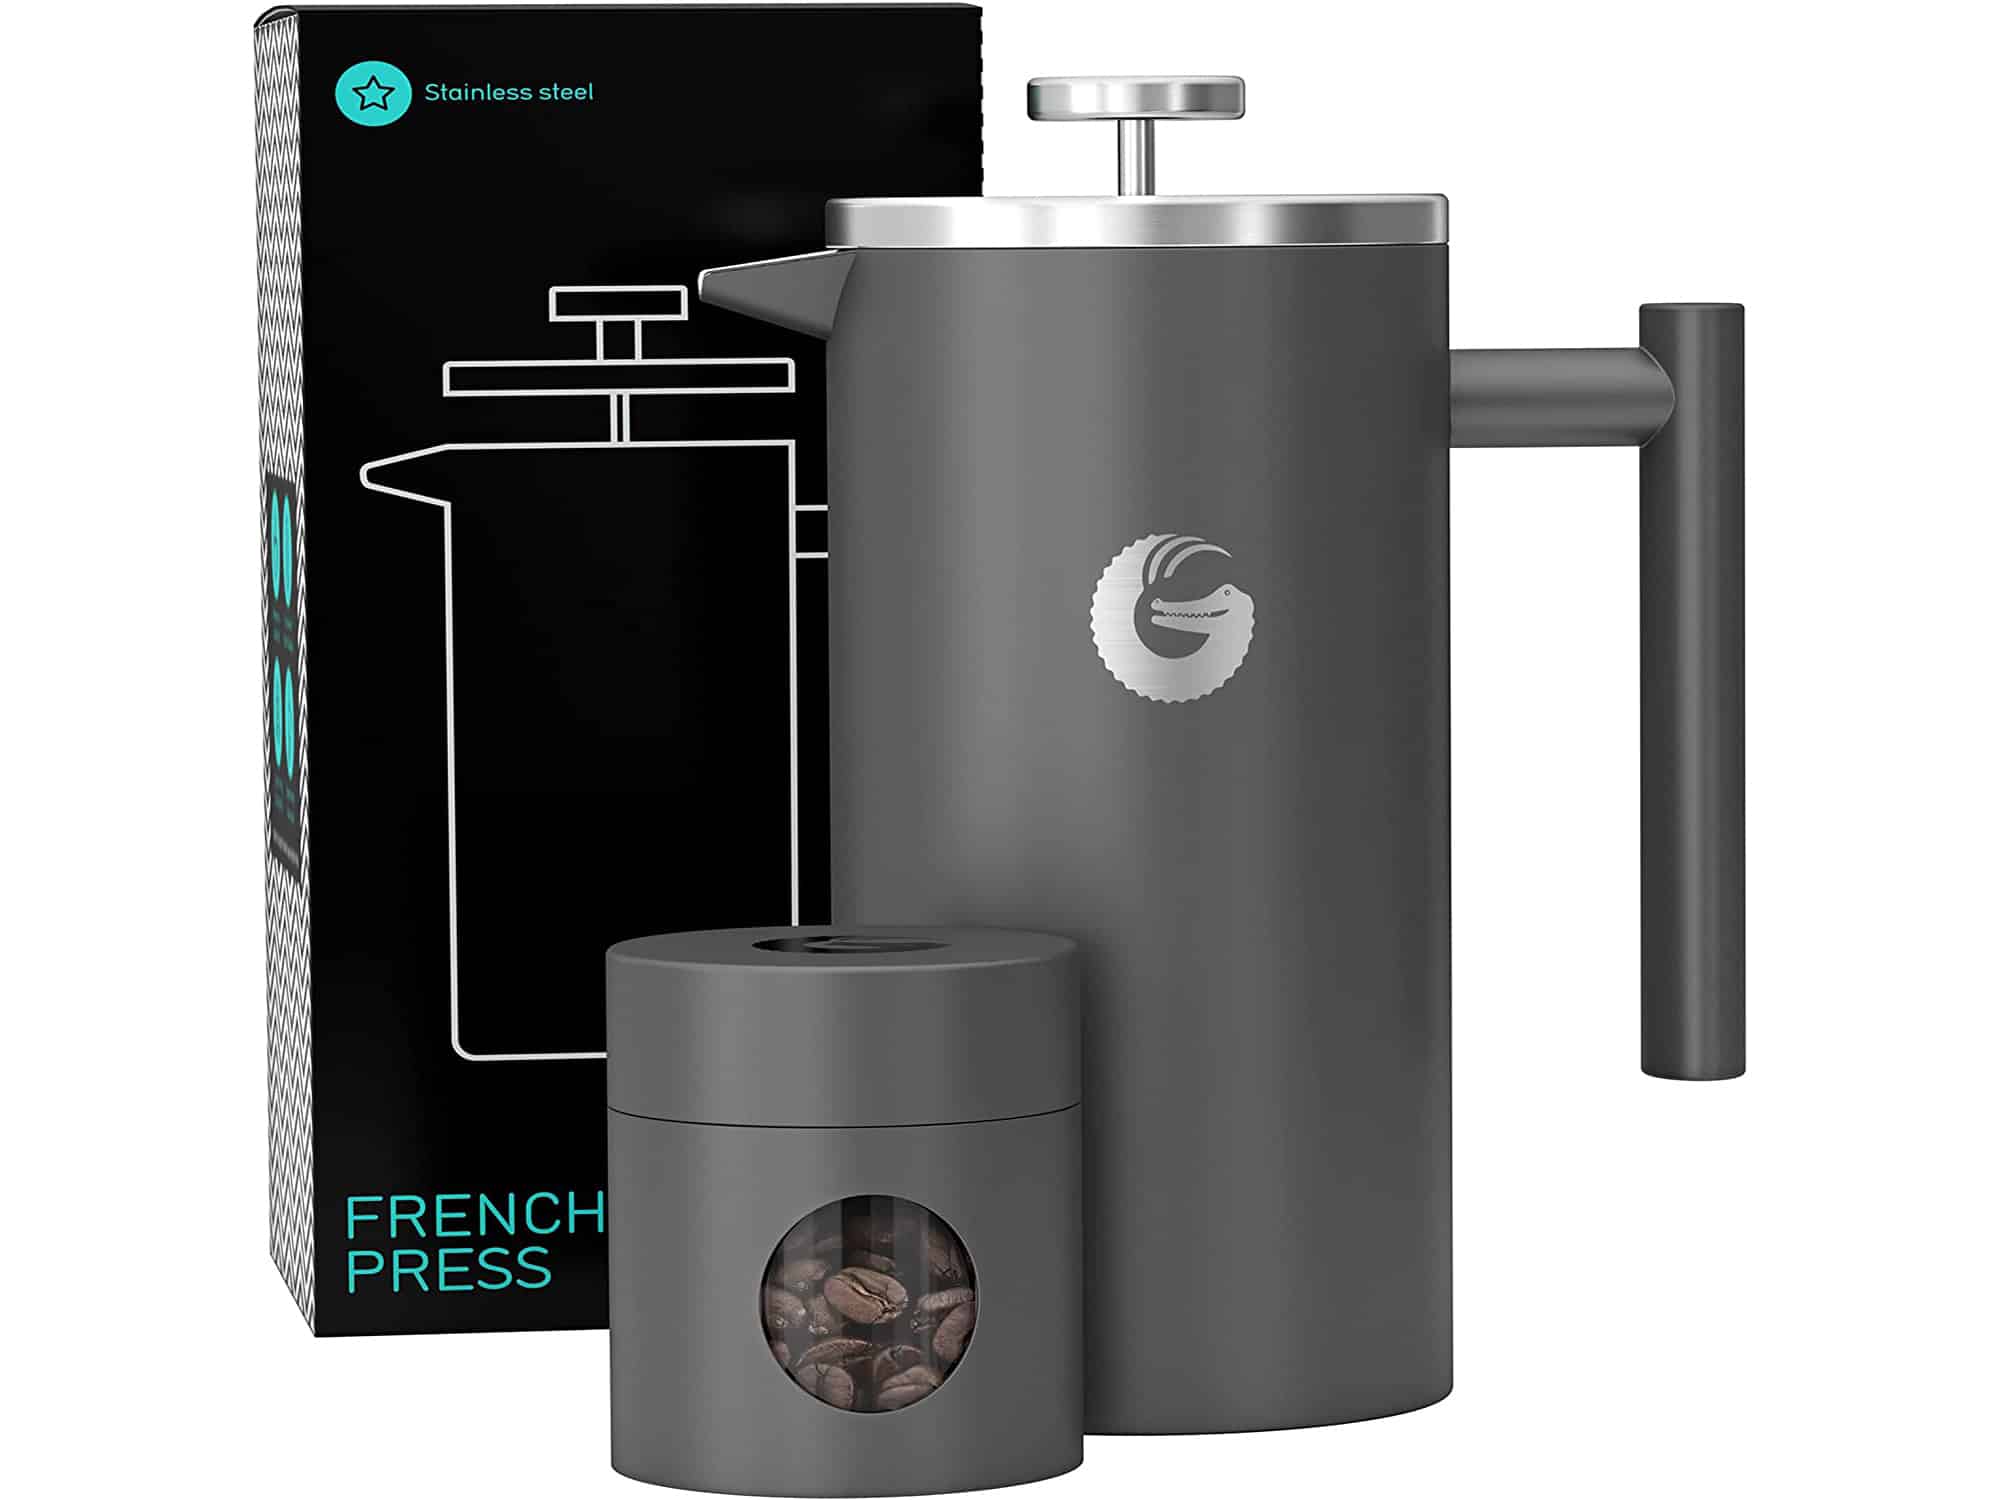 Coffee Gator French Press Coffee Maker - Insulated, Stainless Steel Manual Coffee Makers For Home, Camping w/ Travel Canister- Presses 4 Cup Serving - Large, Gray (34 fl oz)